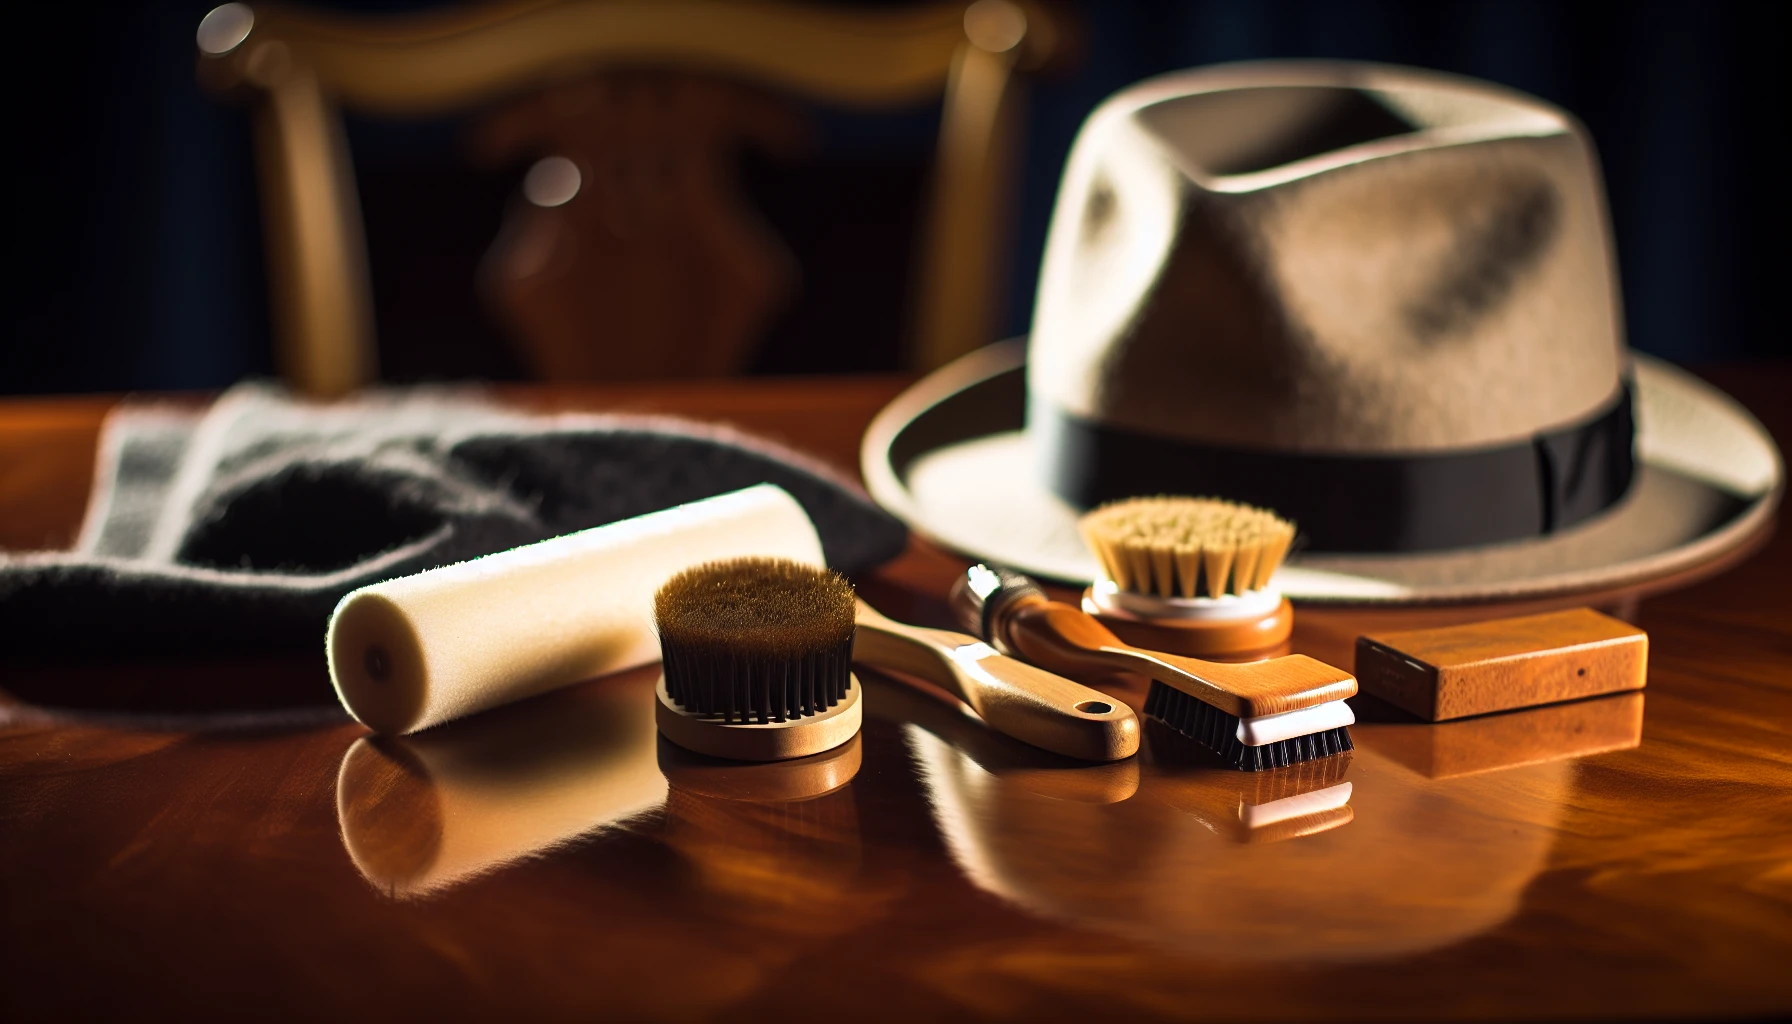 How to Clean a Felt Hat in a Few Easy Steps